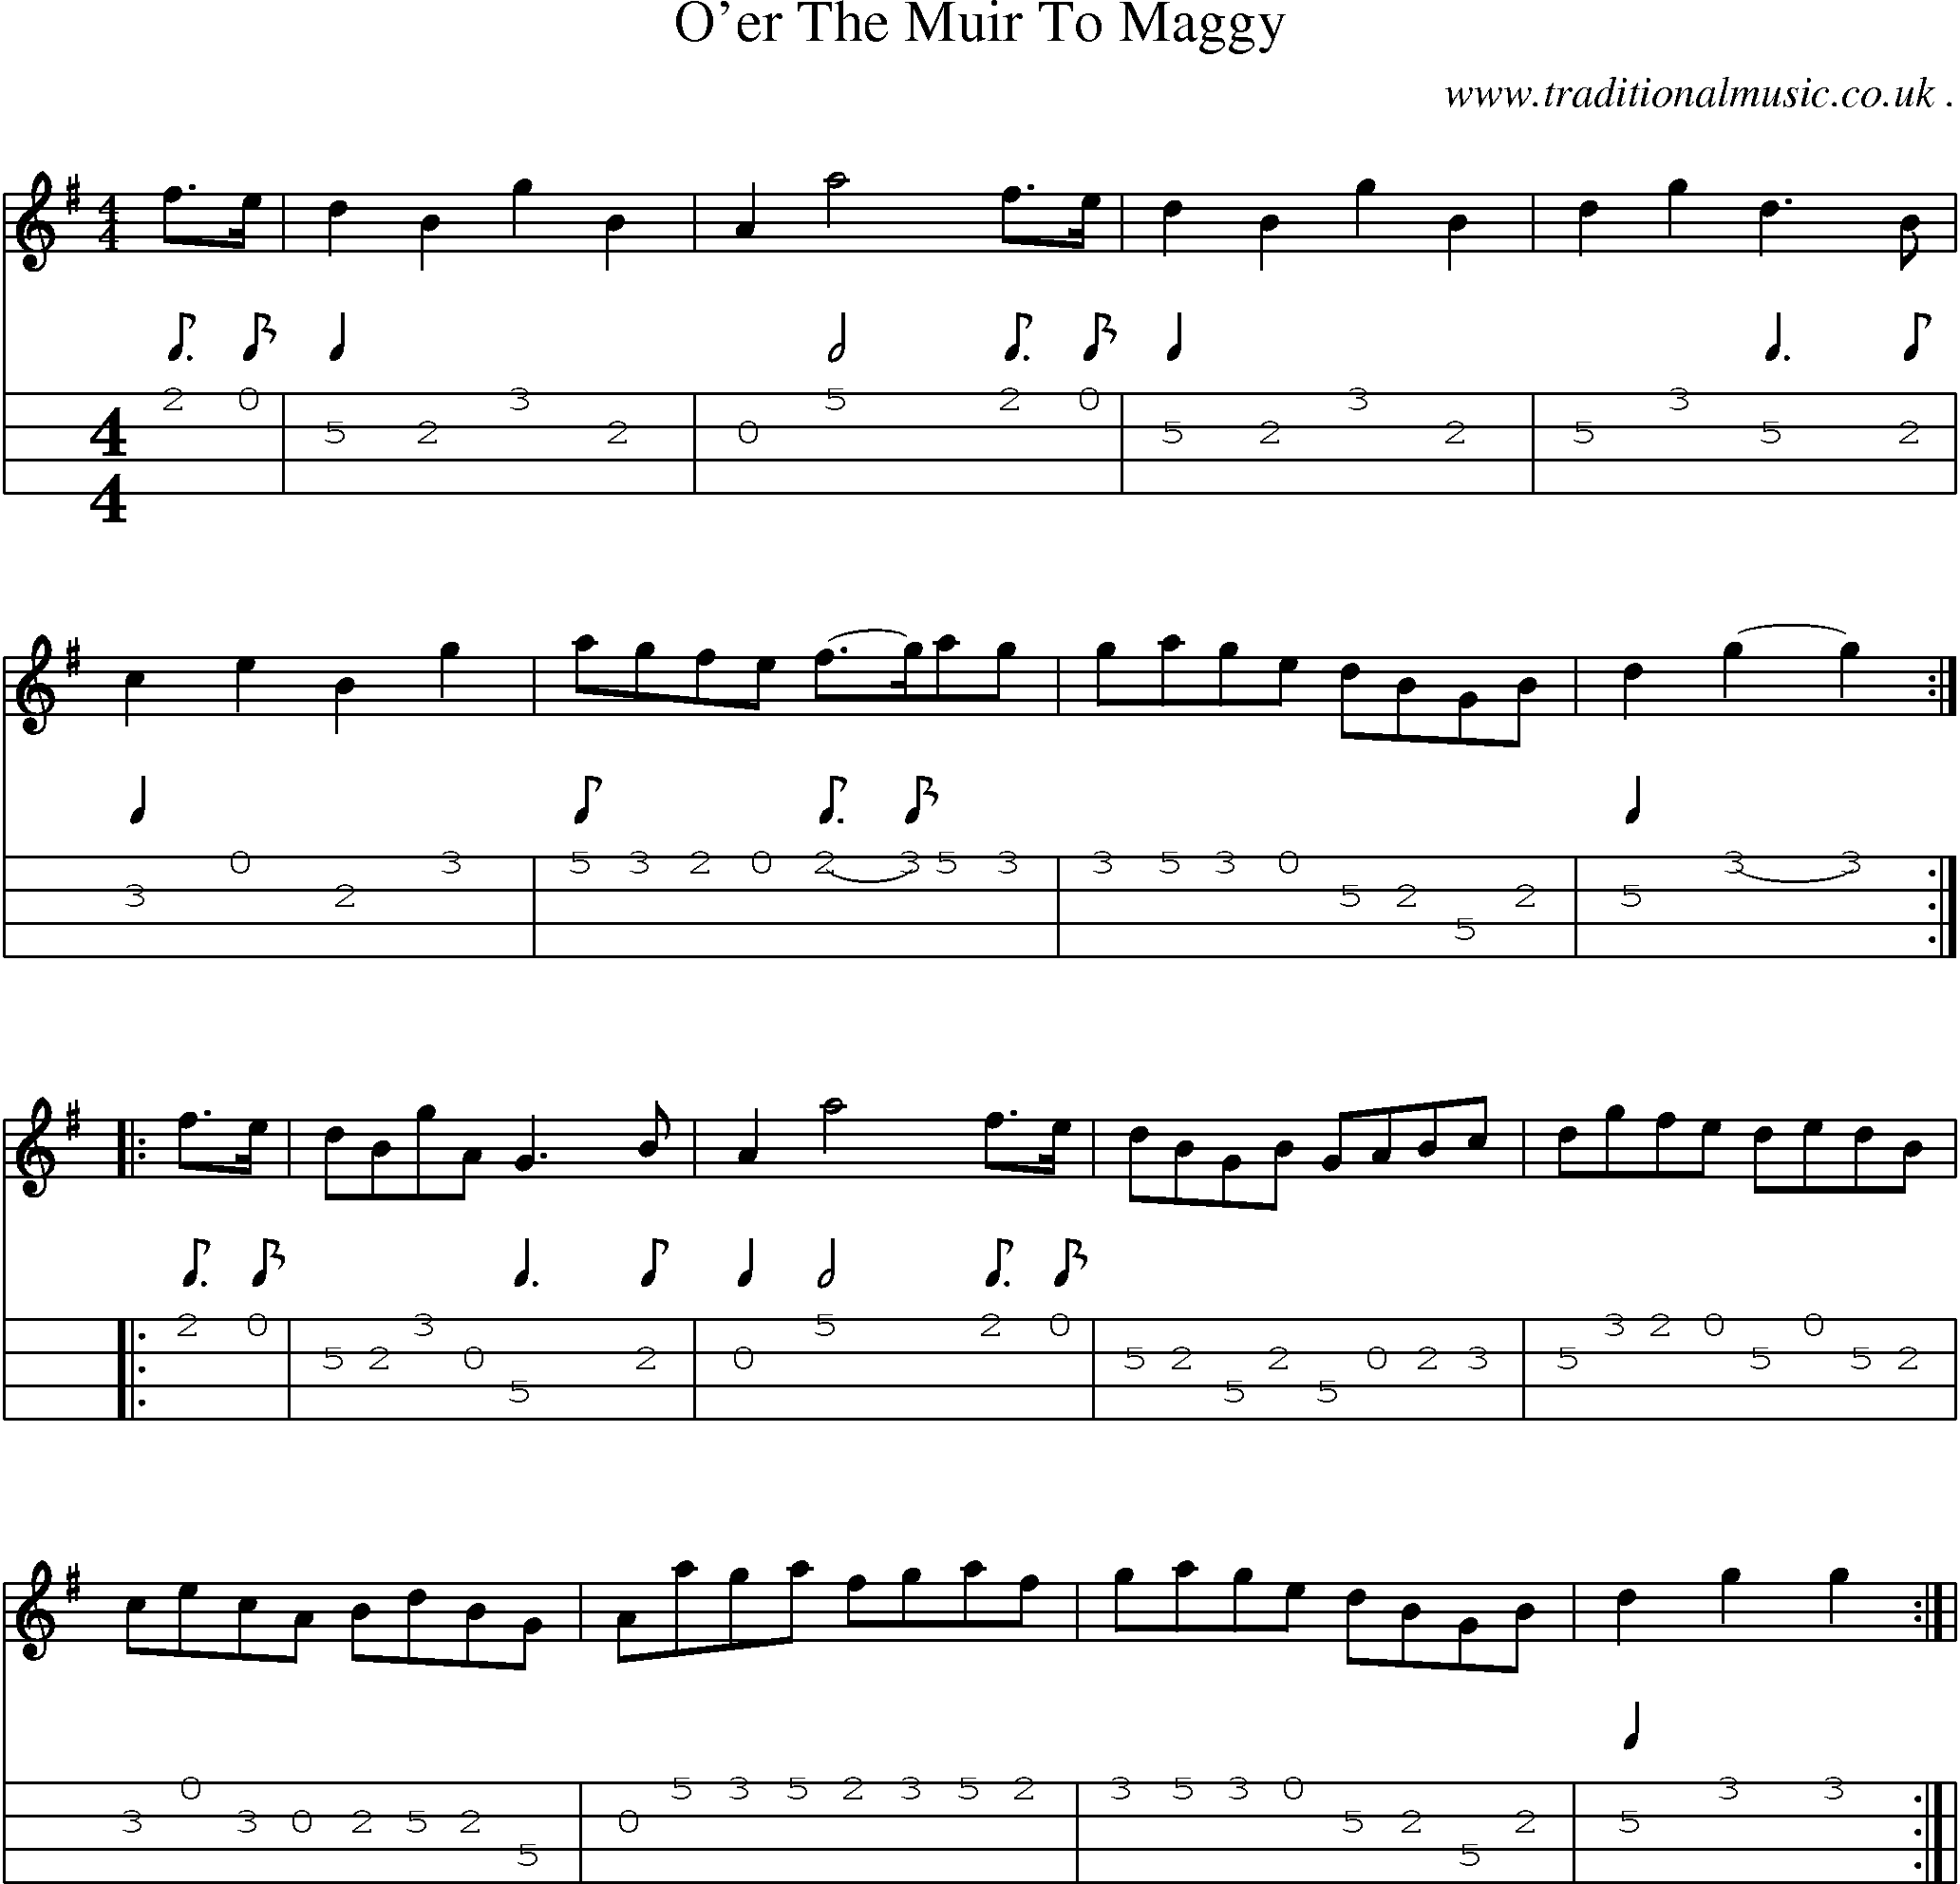 Sheet-Music and Mandolin Tabs for Oer The Muir To Maggy